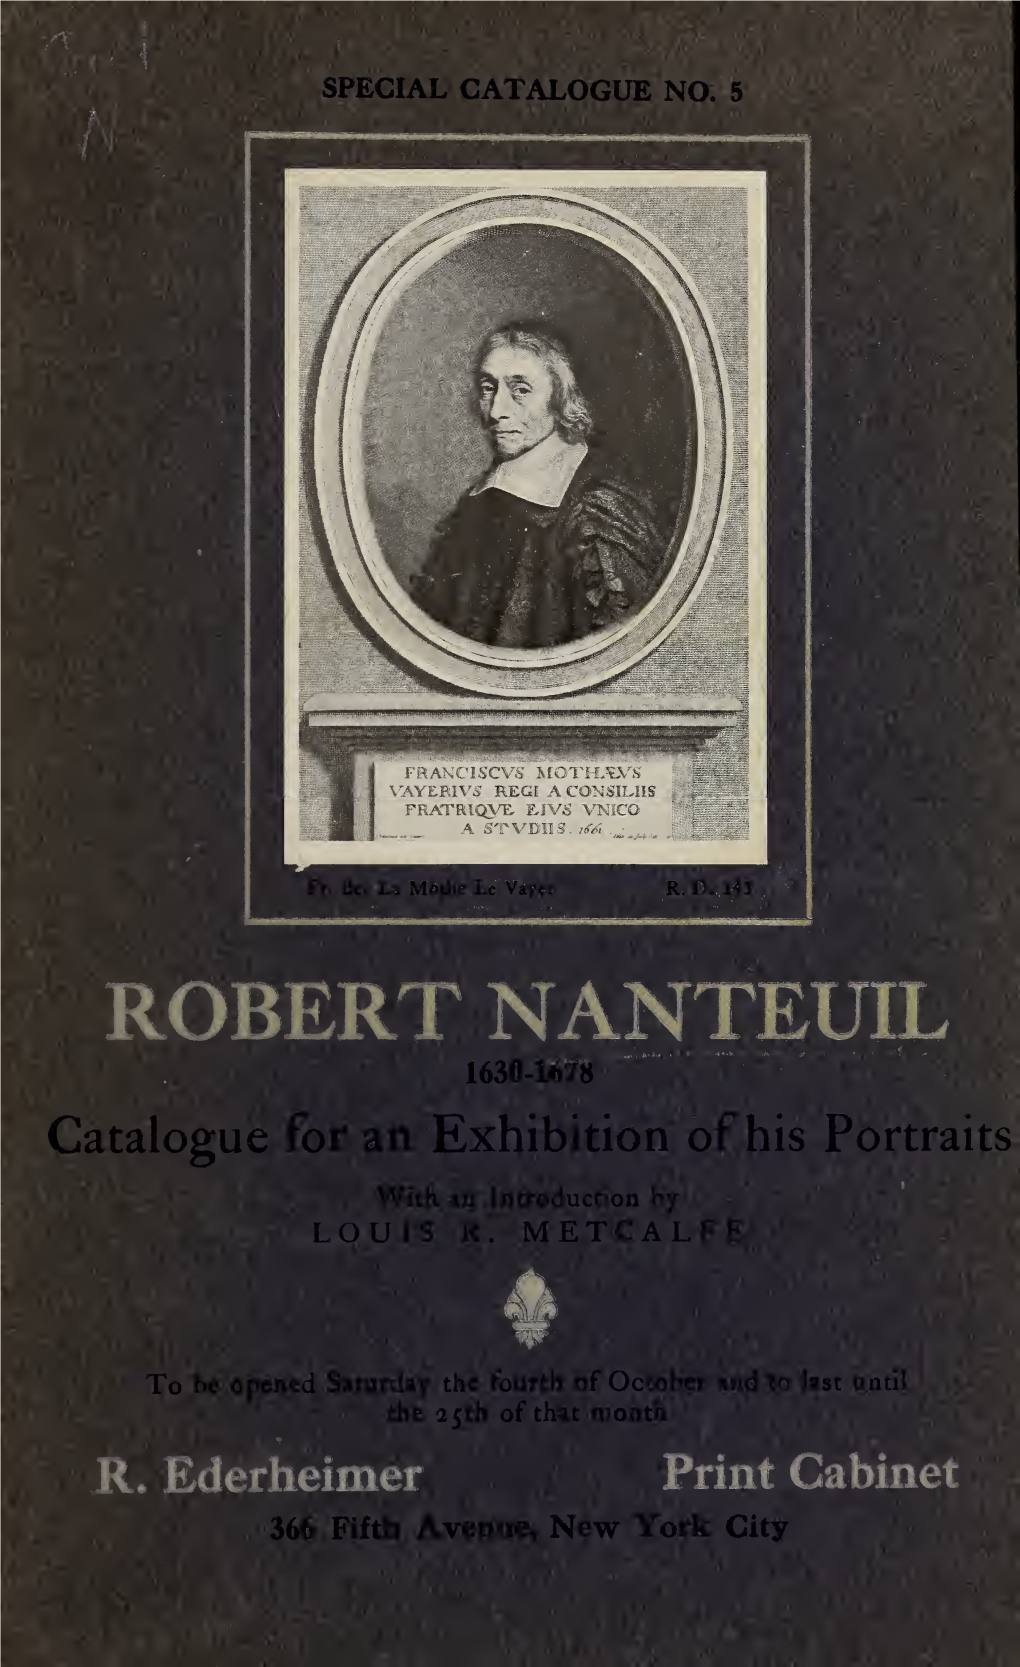 Illustrated Catalogue of an EXHIBITION of PORTRAITS by Robert Nanteuil 1630-1678